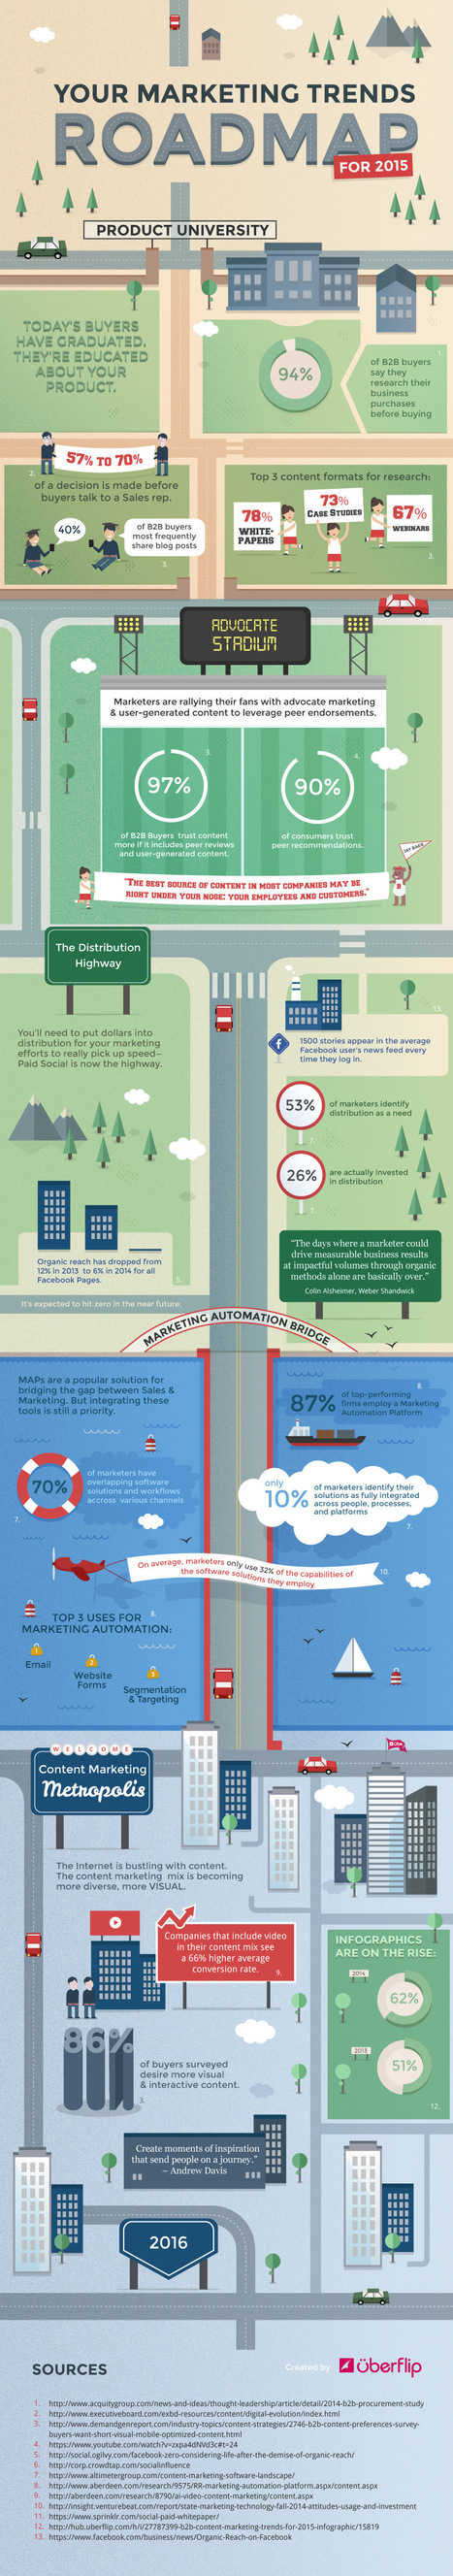 Are These 3 Points of Interest on Your Marketing Road Map? #infographic | MarketingHits | Scoop.it